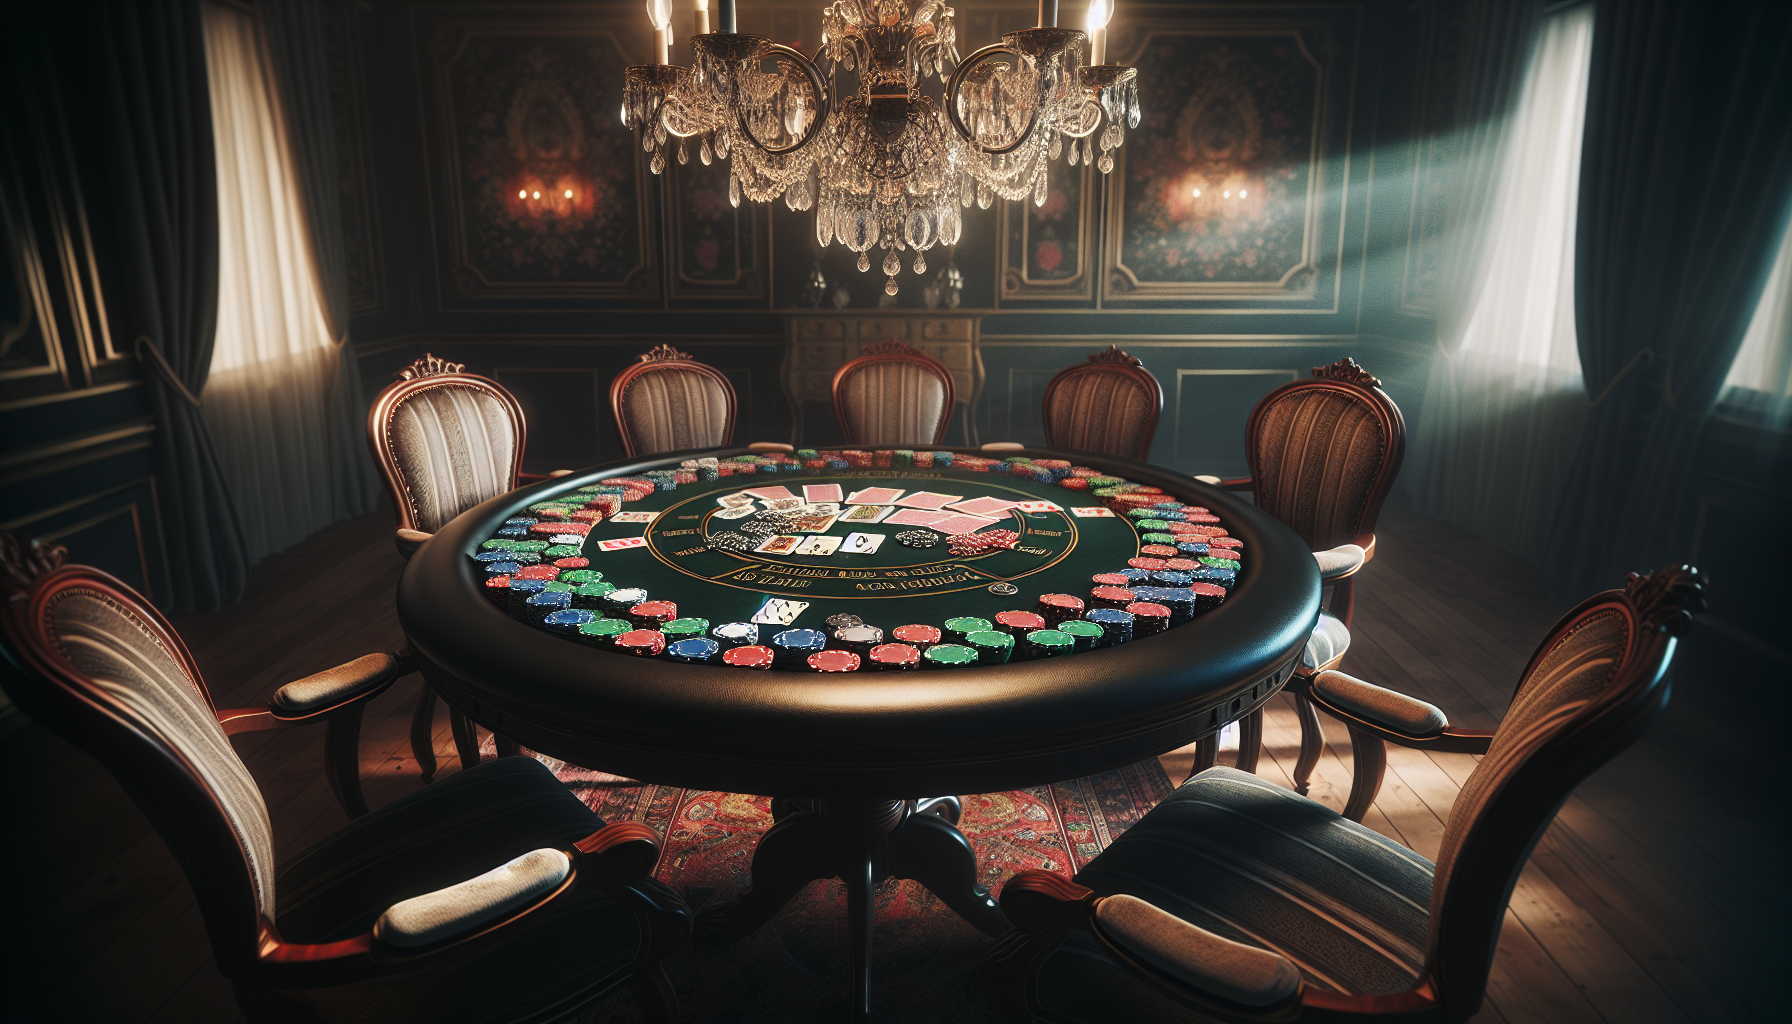 Poker table with cards and chips